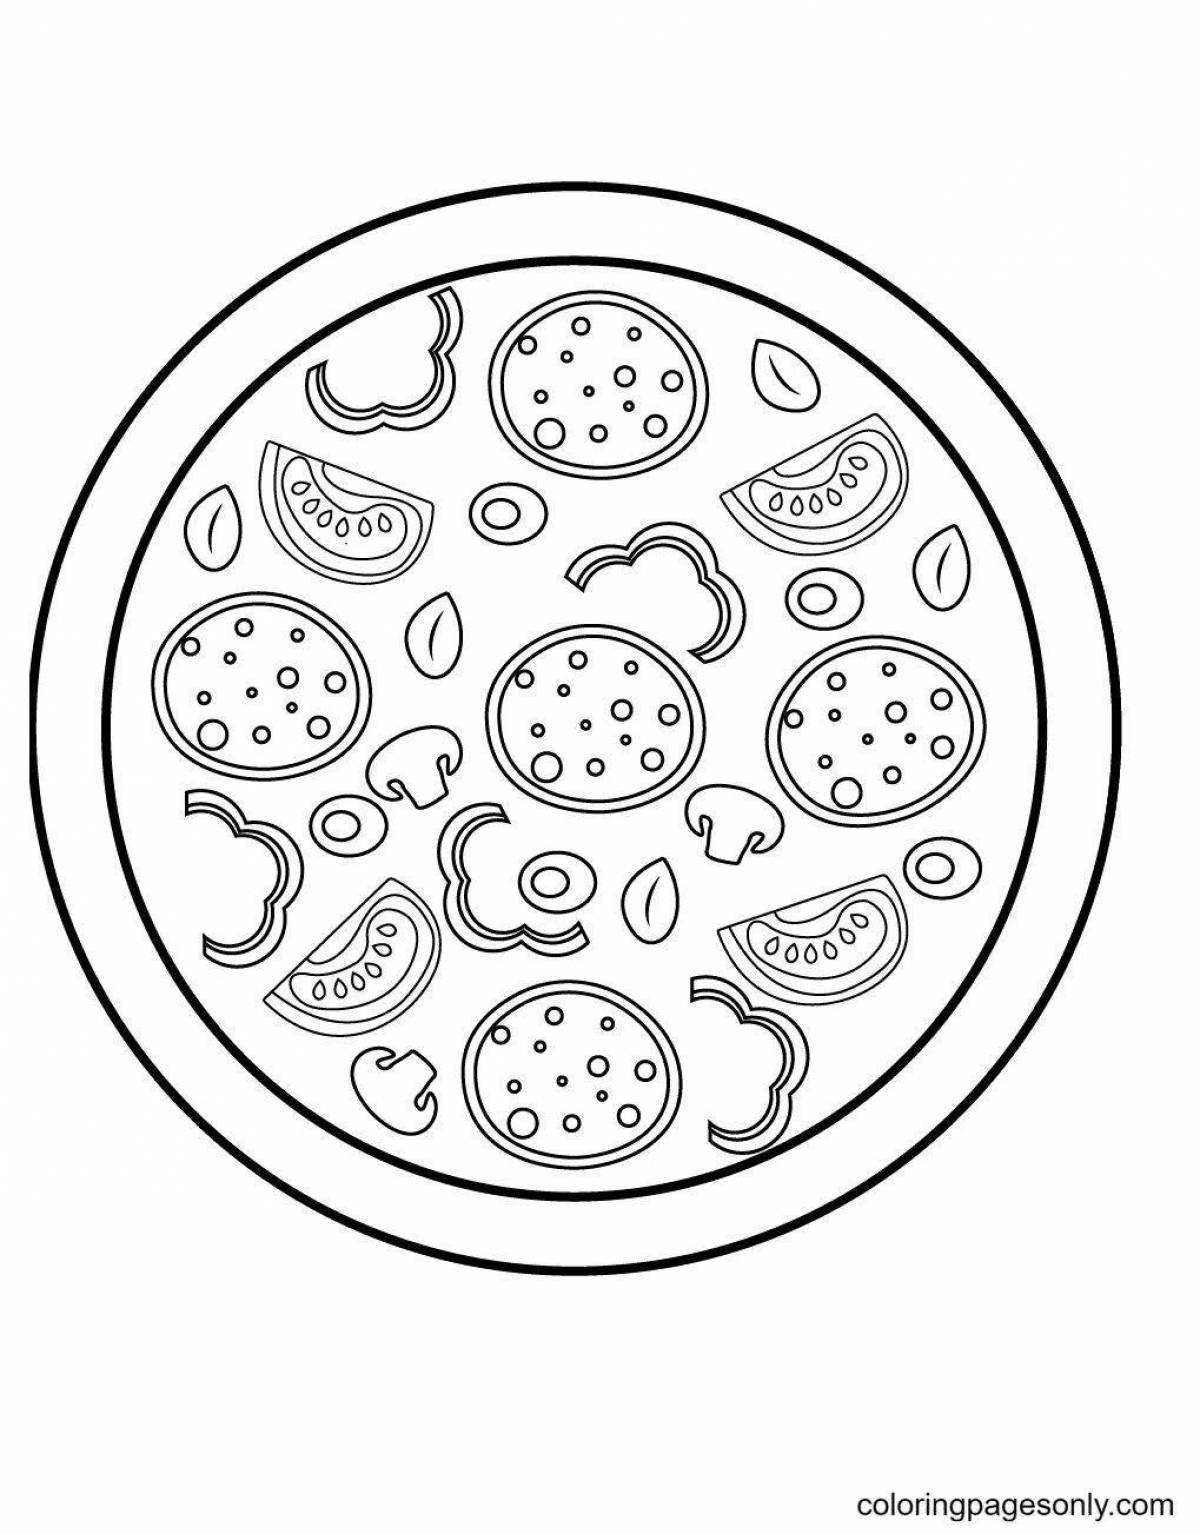 Irresistible pepperoni pizza coloring book